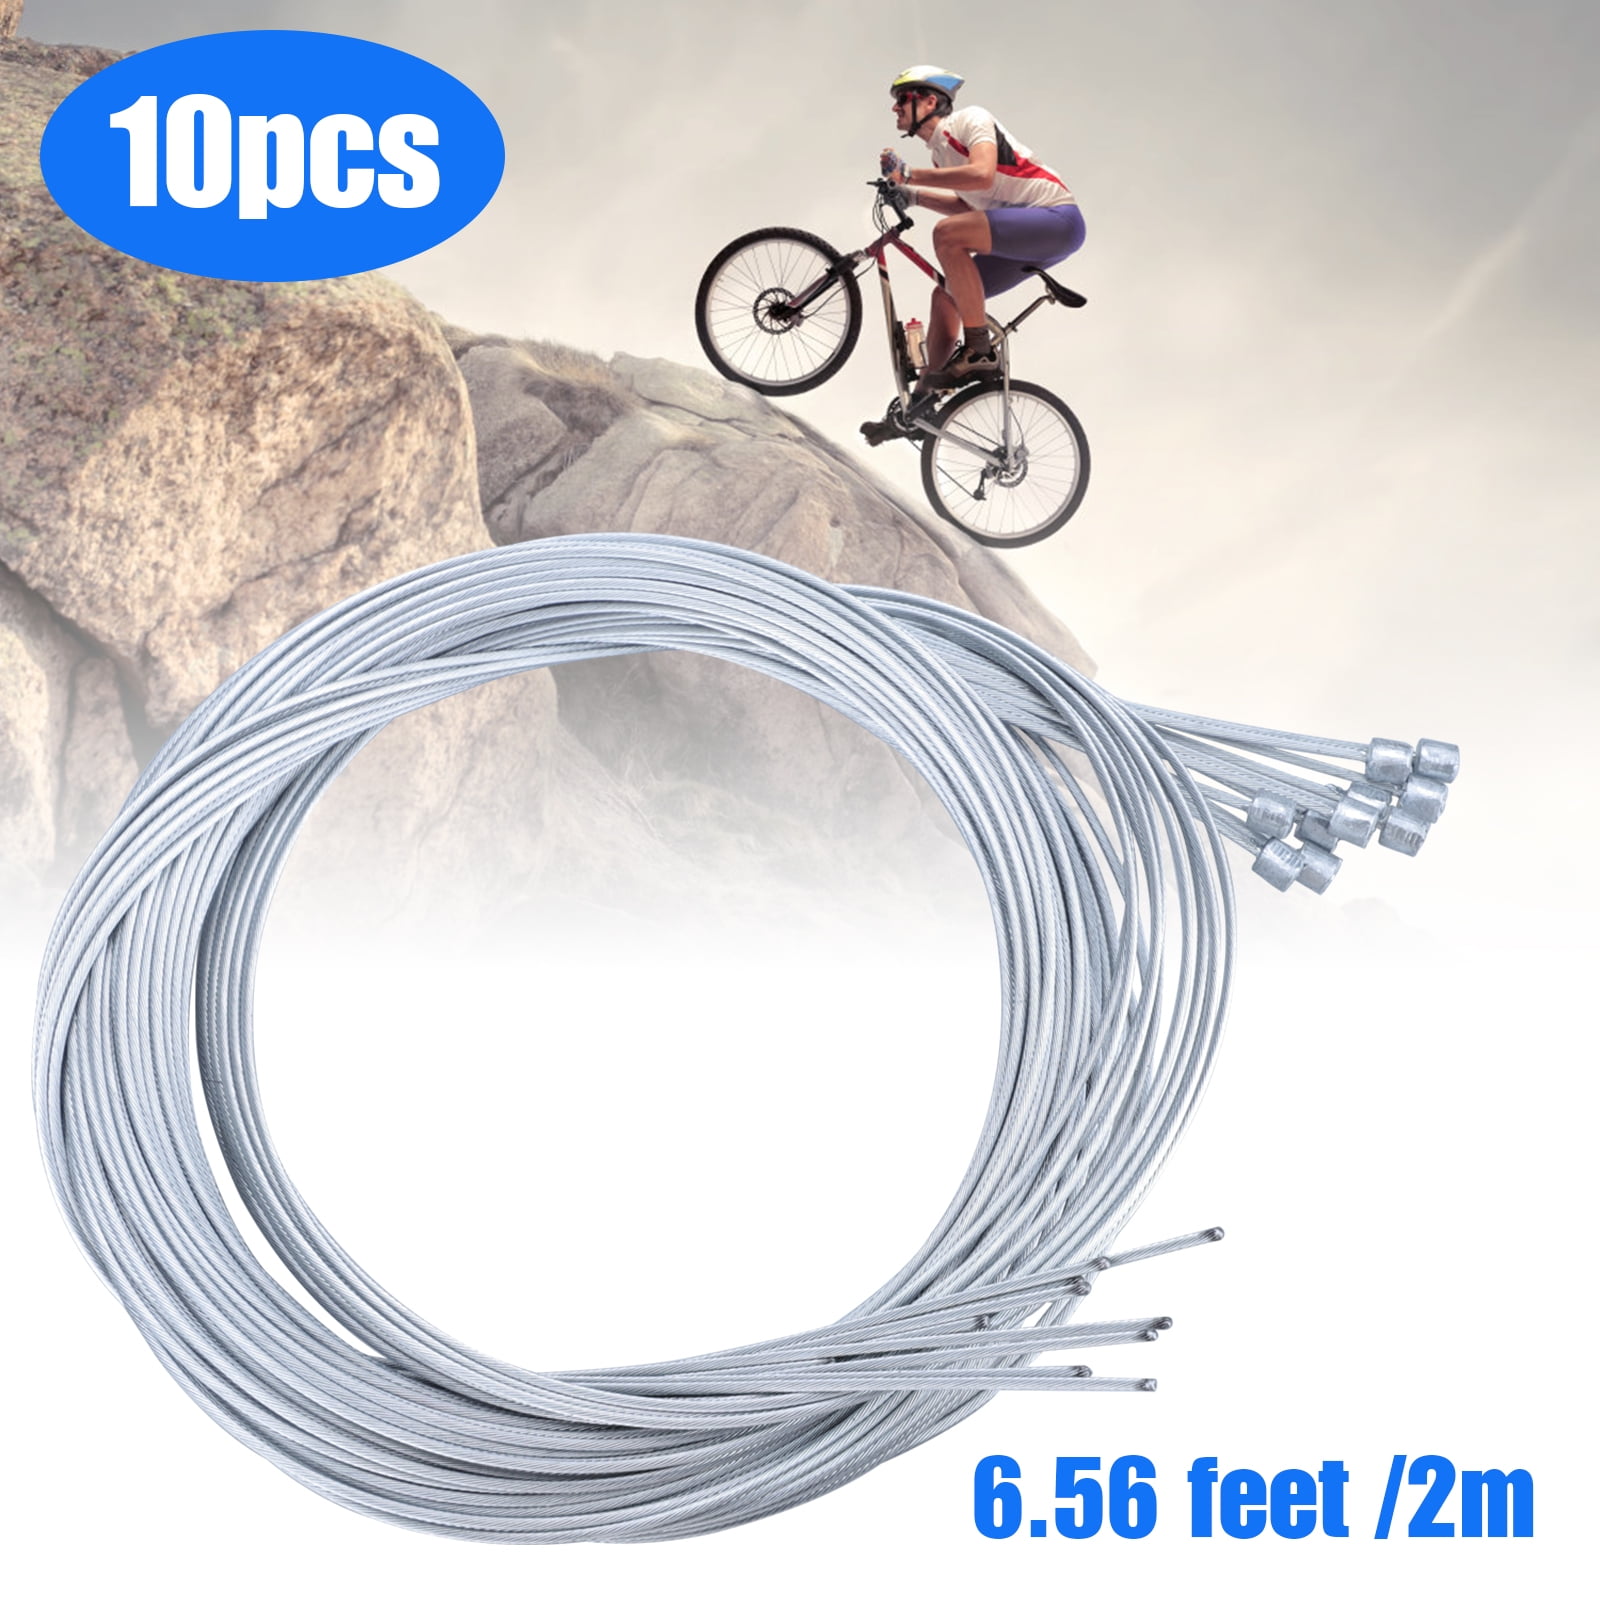 Details about   Rear Front Bicycle Brake Derailleur Cable Line Wire Repair Tools Kit For MTB Bik 